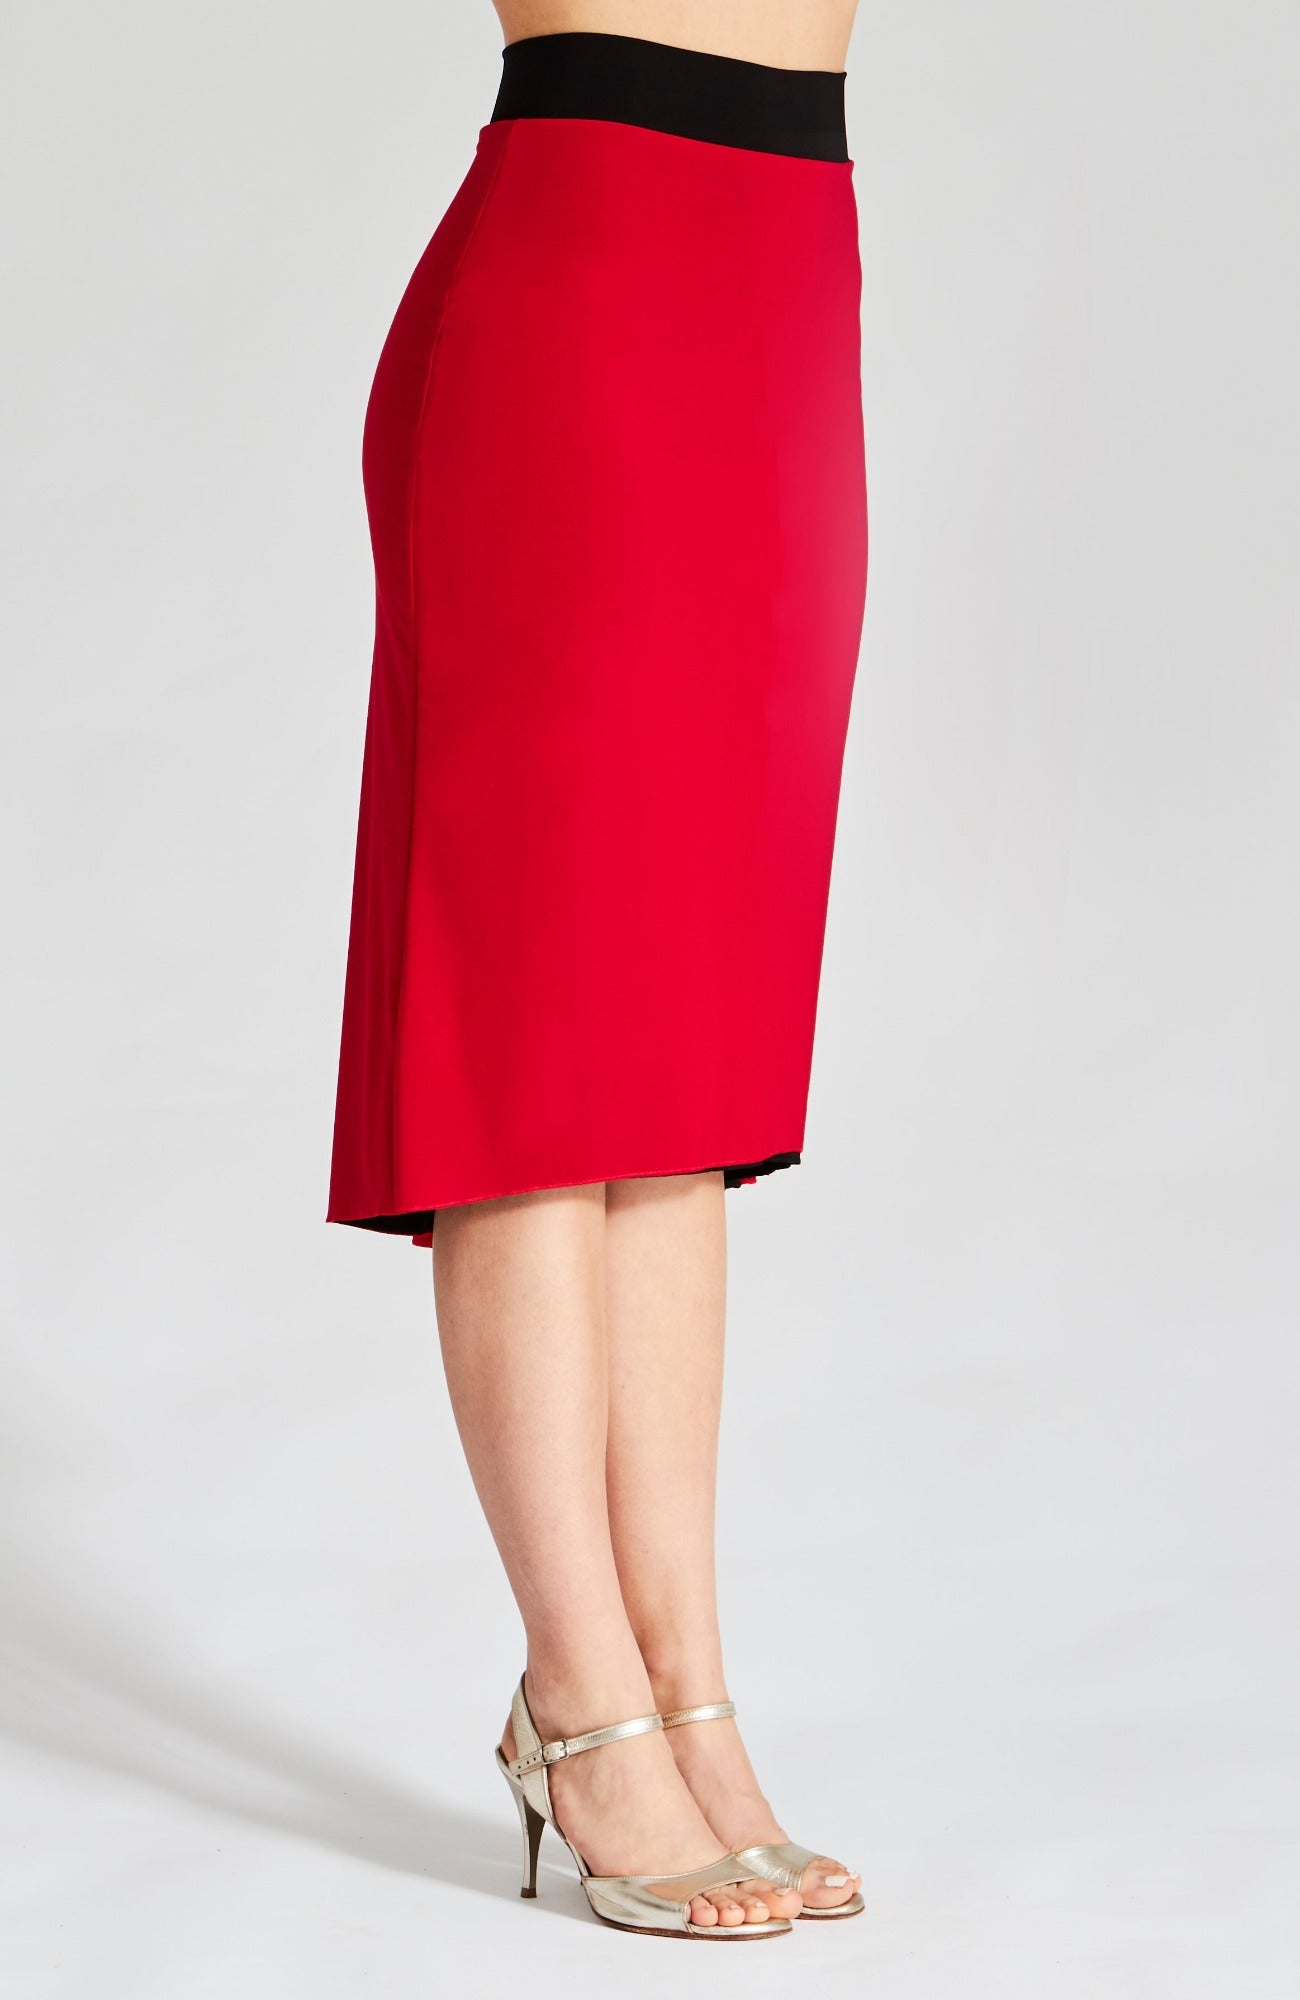 reversible tango skirt in red and black